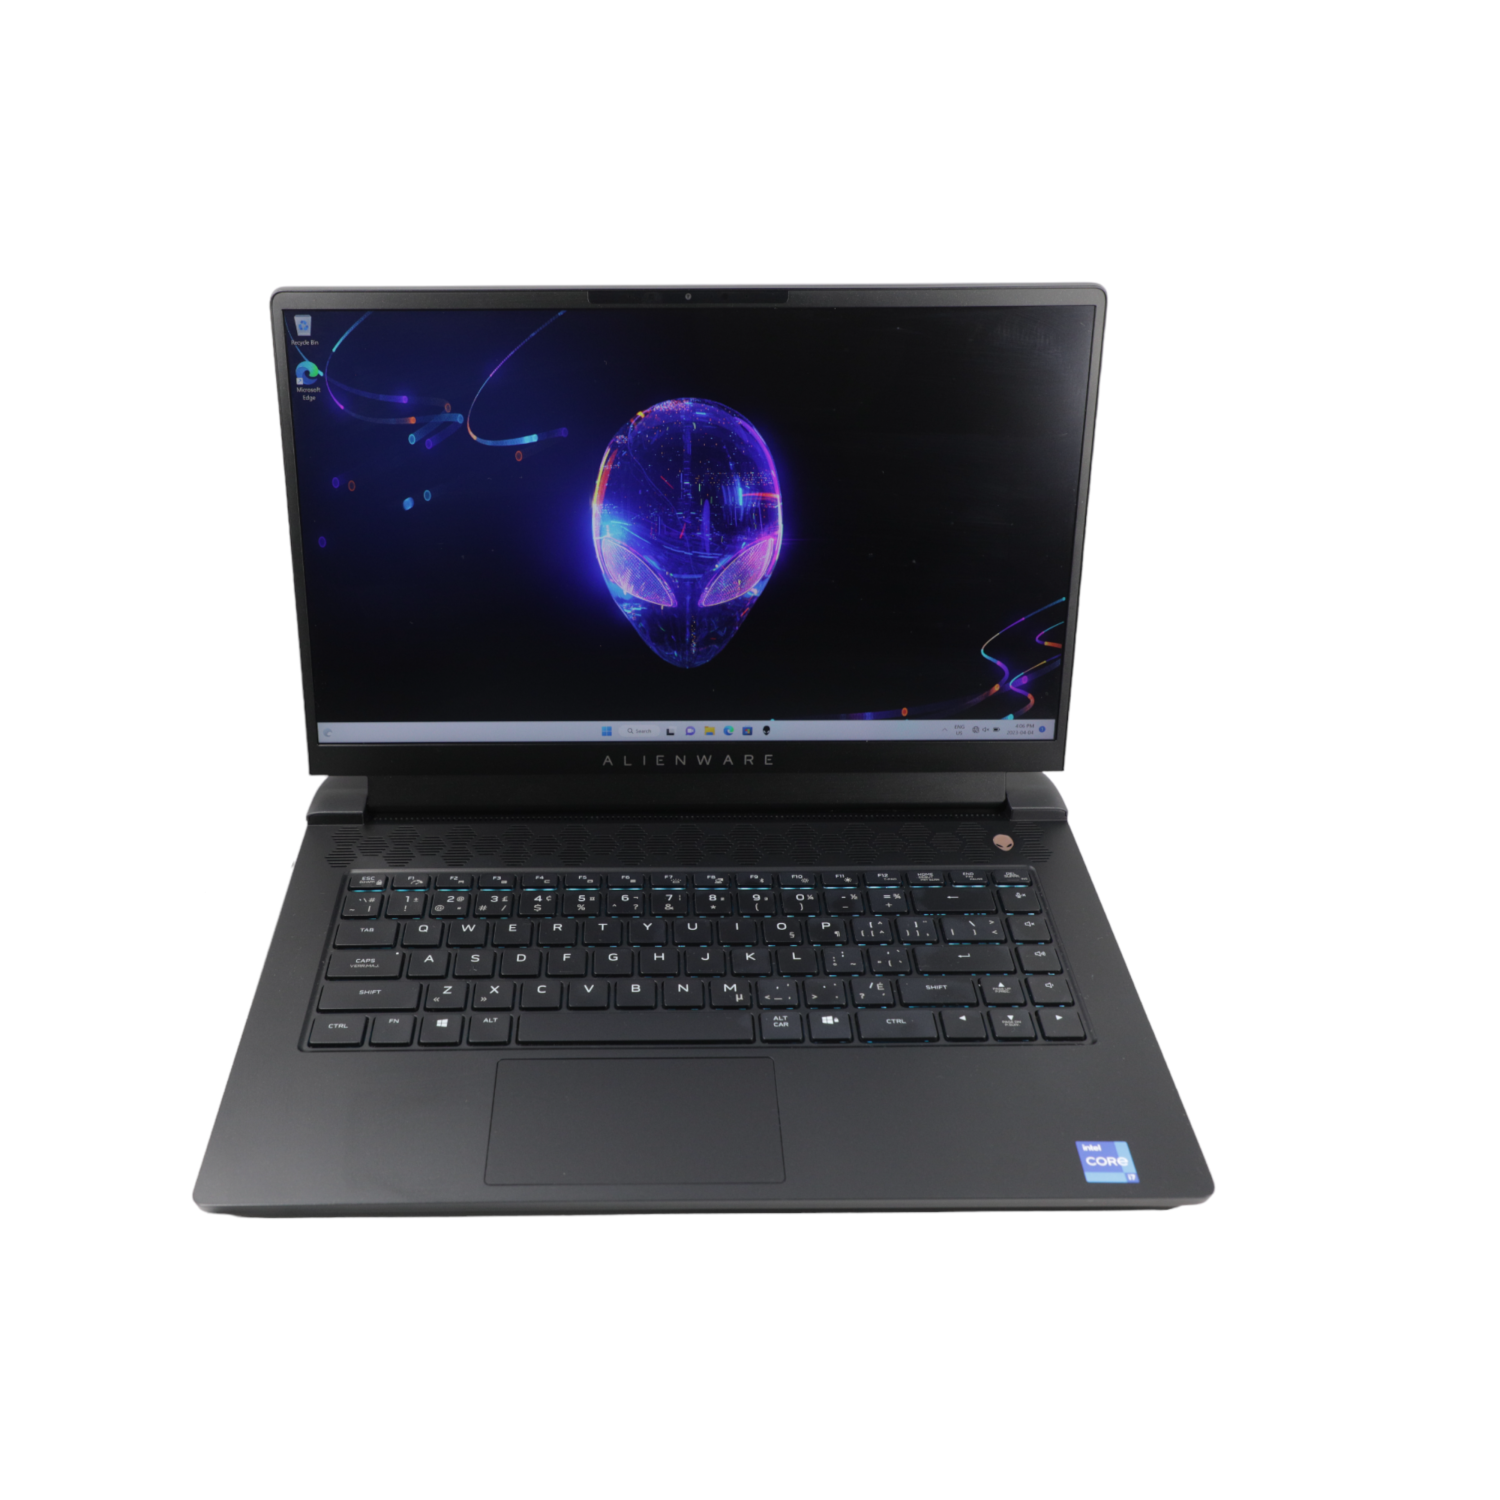 Refurbished (Excellent) - Dell Alienware M15 R6 15" - Intel i7 11800H 16GB 1TB RTX 3070 - Gaming Laptop